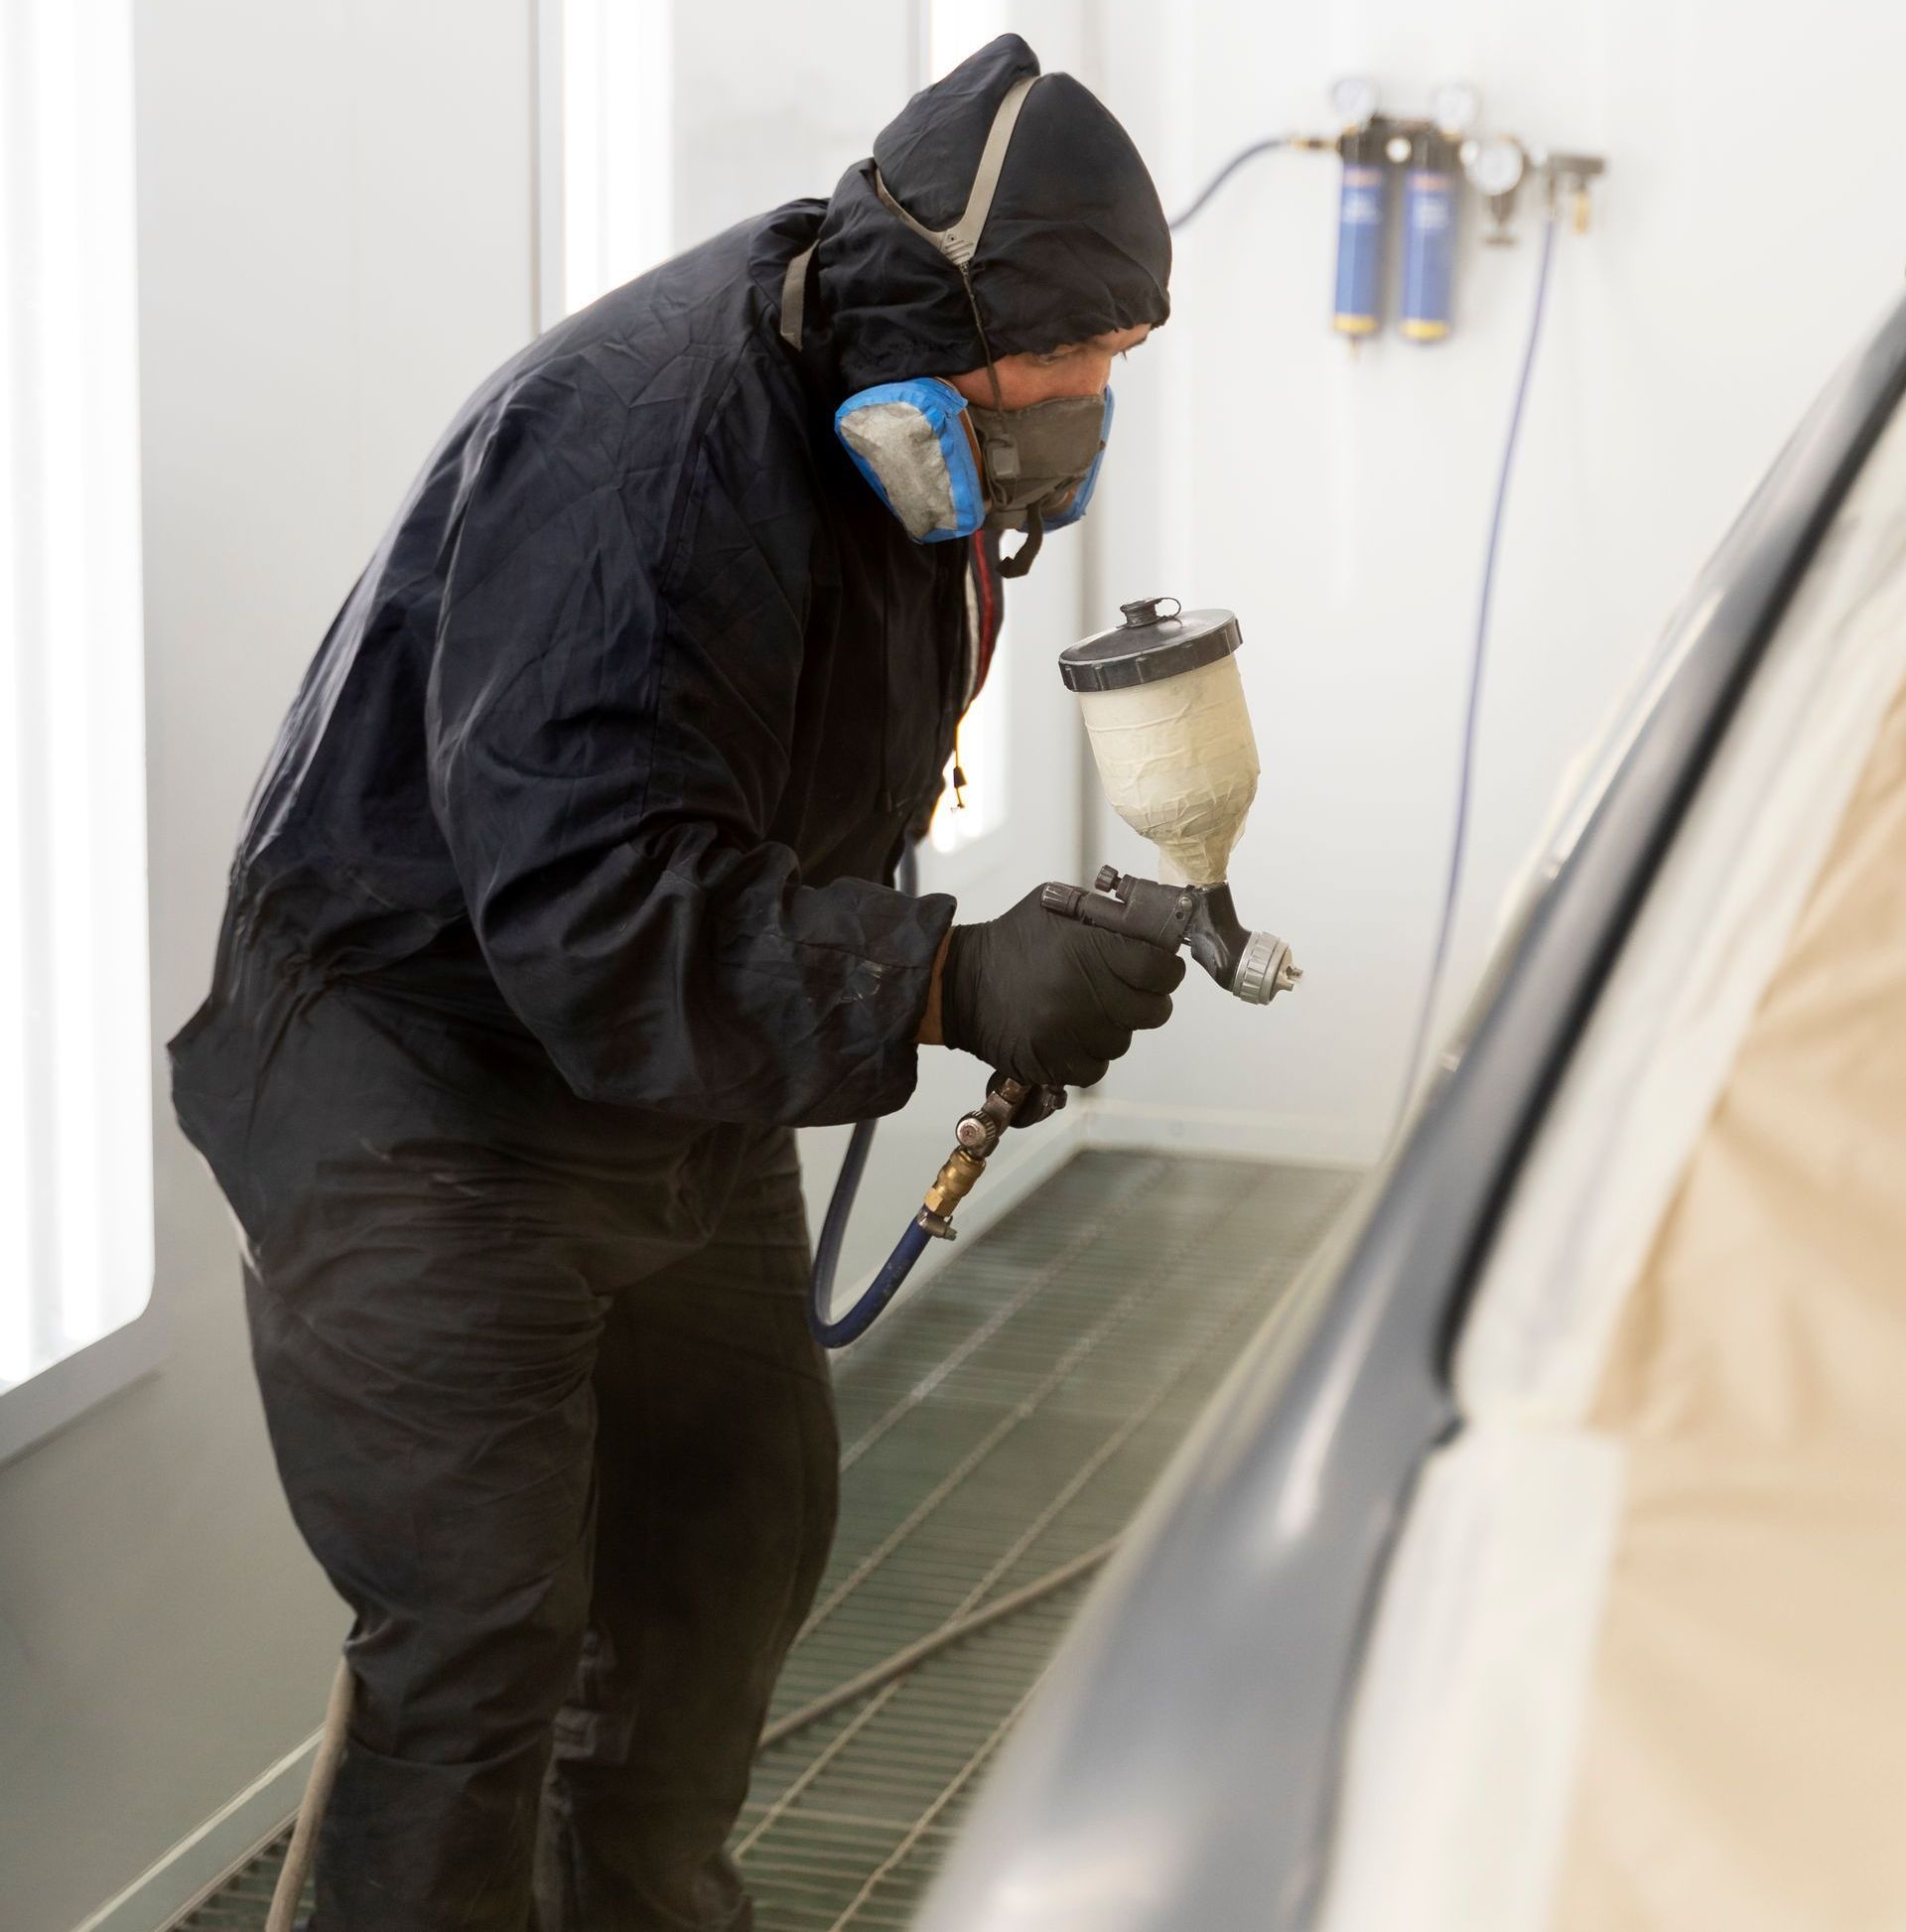 A man wearing a mask is spray painting a car